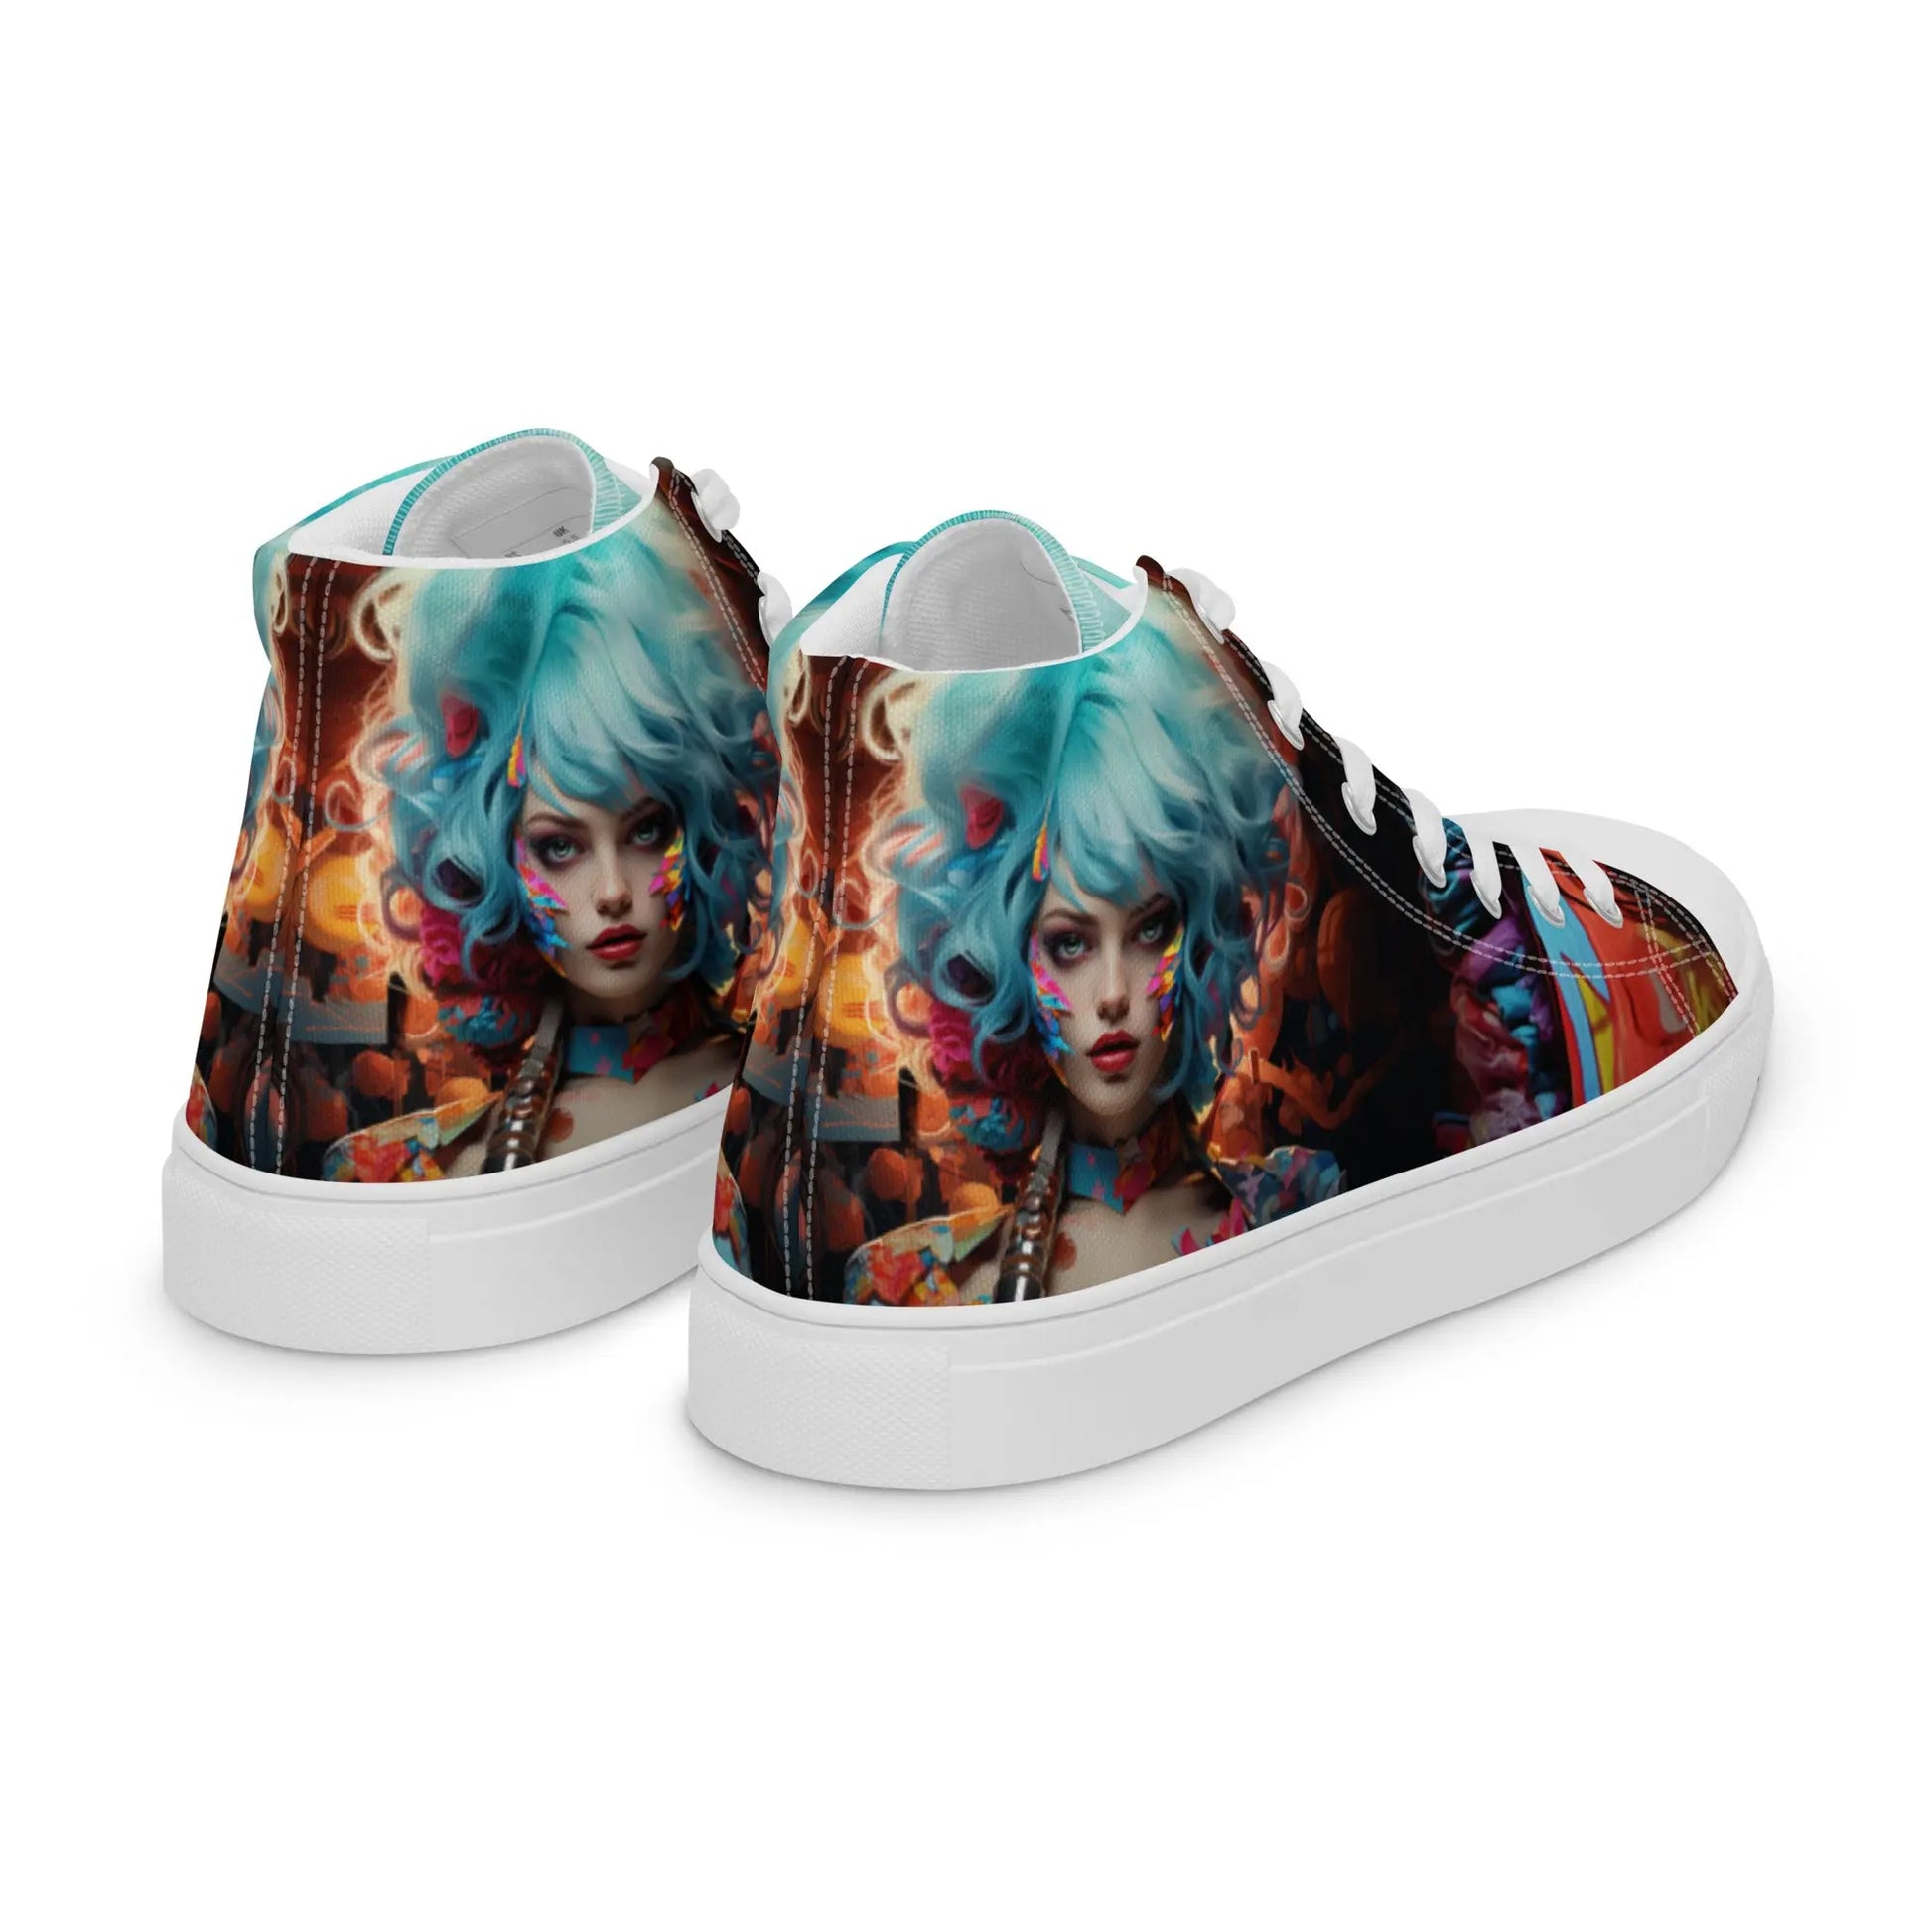 AI-Engineered Unisex High Top Sneakers: Superhero Girl Acidwave Pop Art Design, Style and Comfort with Durable, Art-Inspired Flair Kinetic Footwear